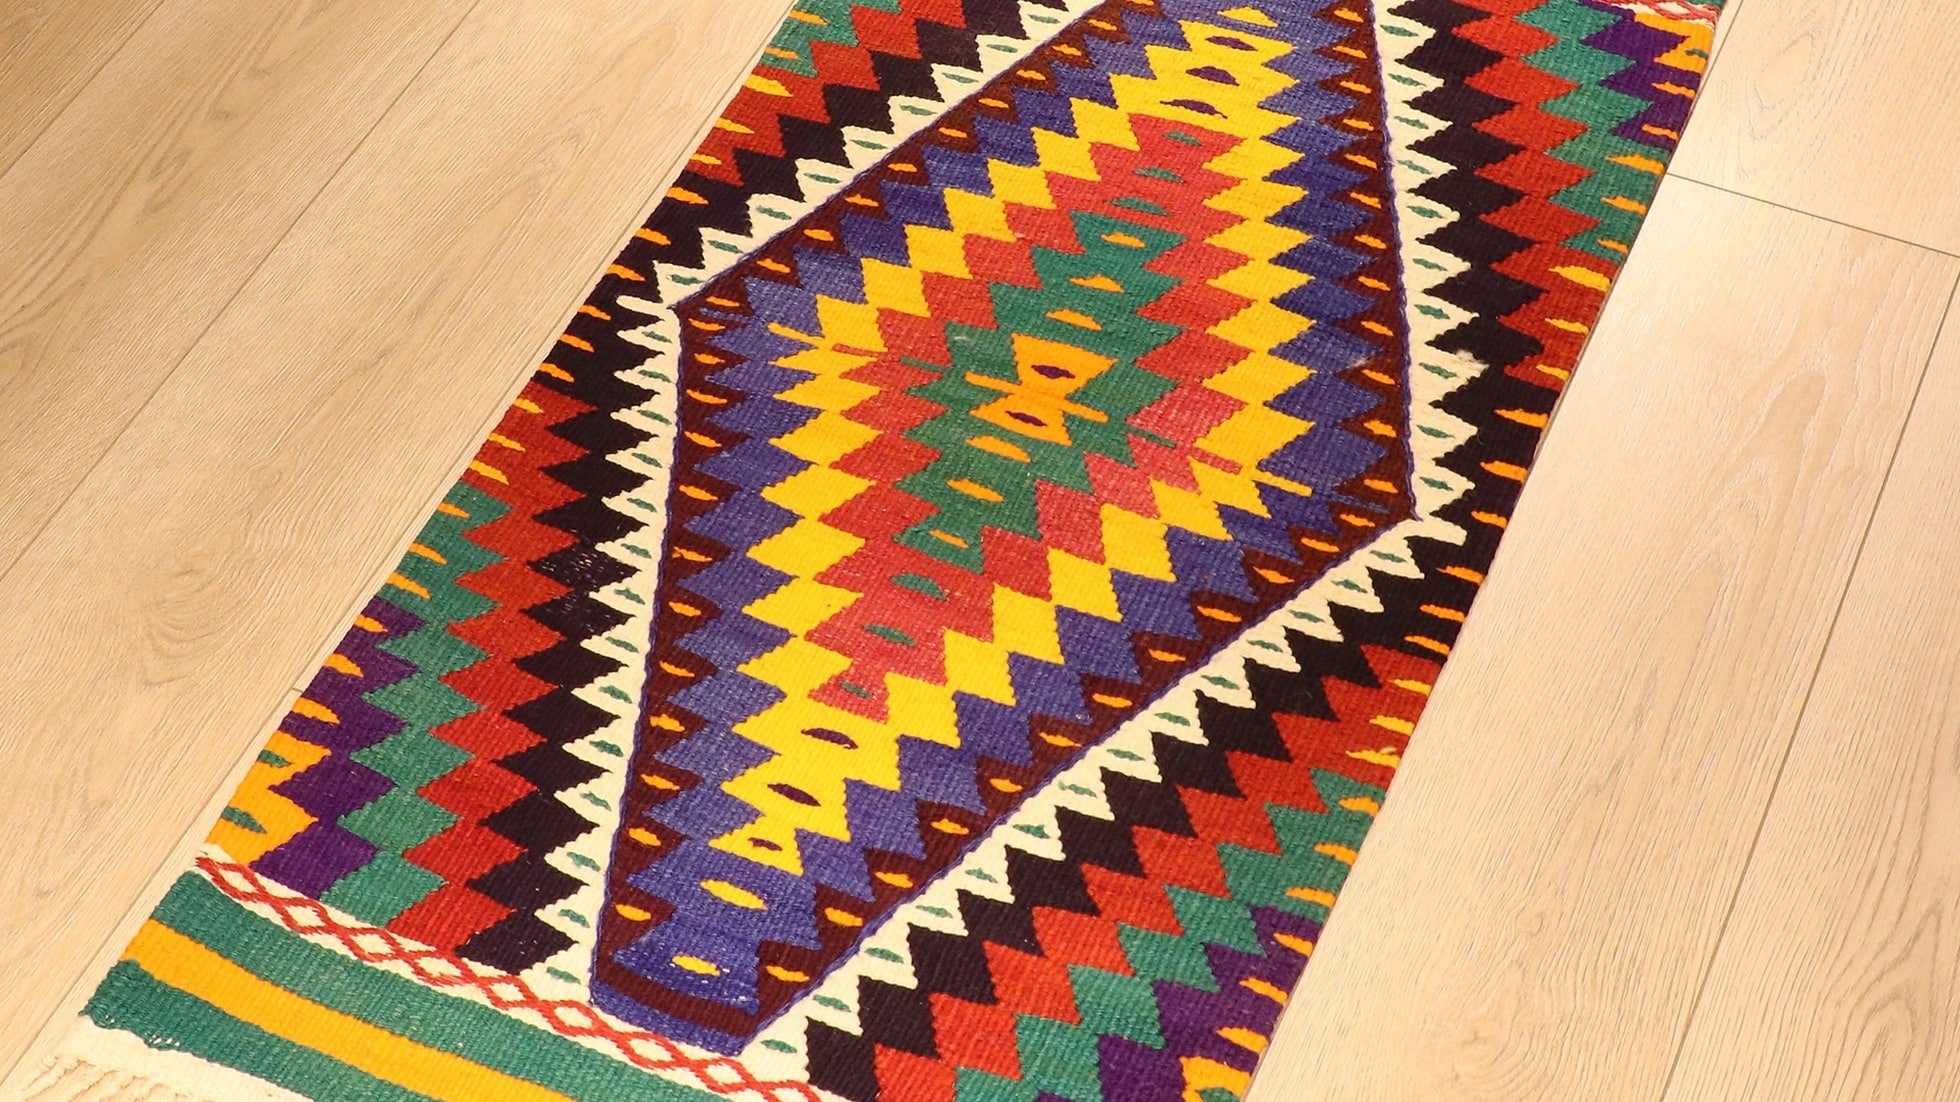 handwoven small area kilim rug in vivid and vibrant color hues